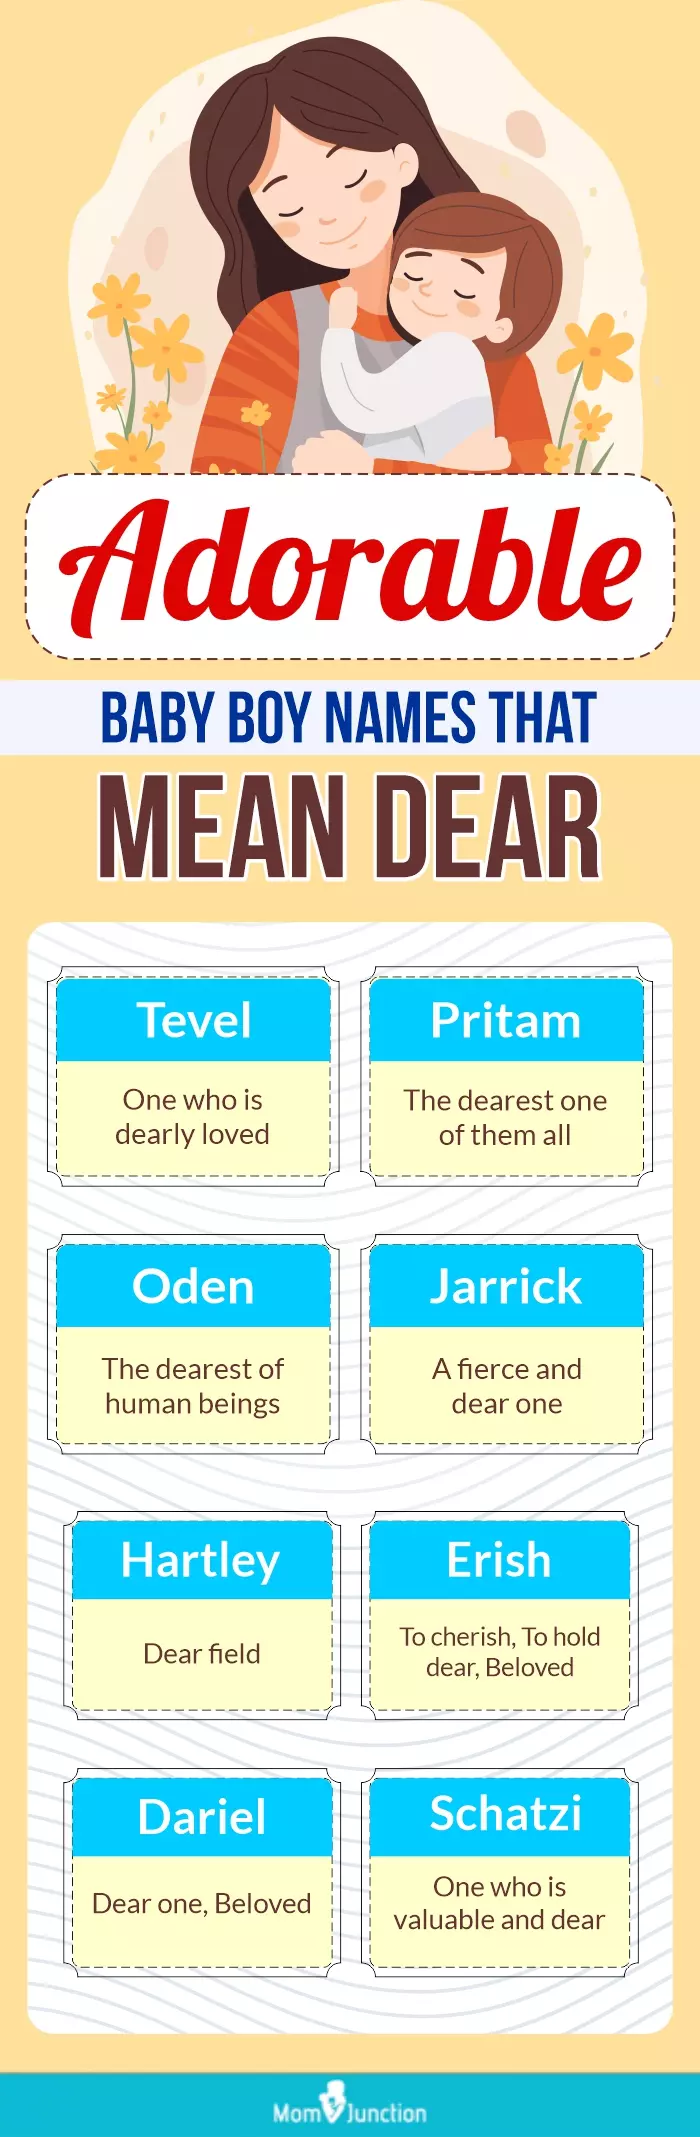 adorable baby boy names that mean dear (infographic)